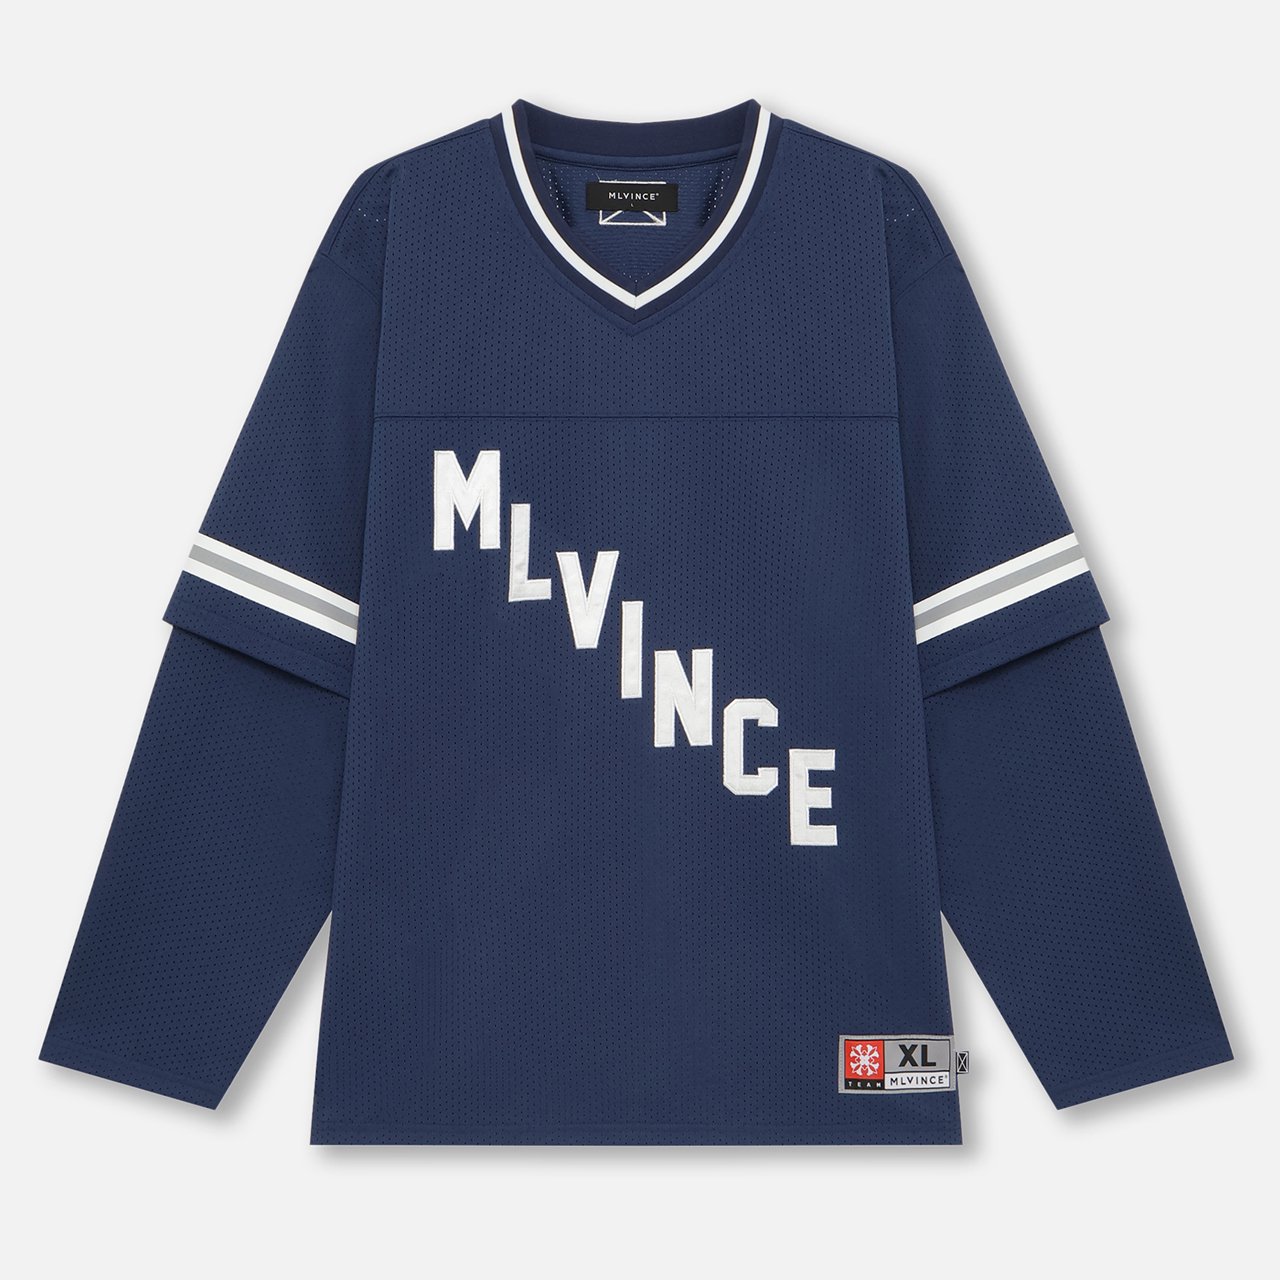 <img class='new_mark_img1' src='https://img.shop-pro.jp/img/new/icons5.gif' style='border:none;display:inline;margin:0px;padding:0px;width:auto;' />MLVINCE () | LAYERED L/S FOOTBALL SHIRT NAVY